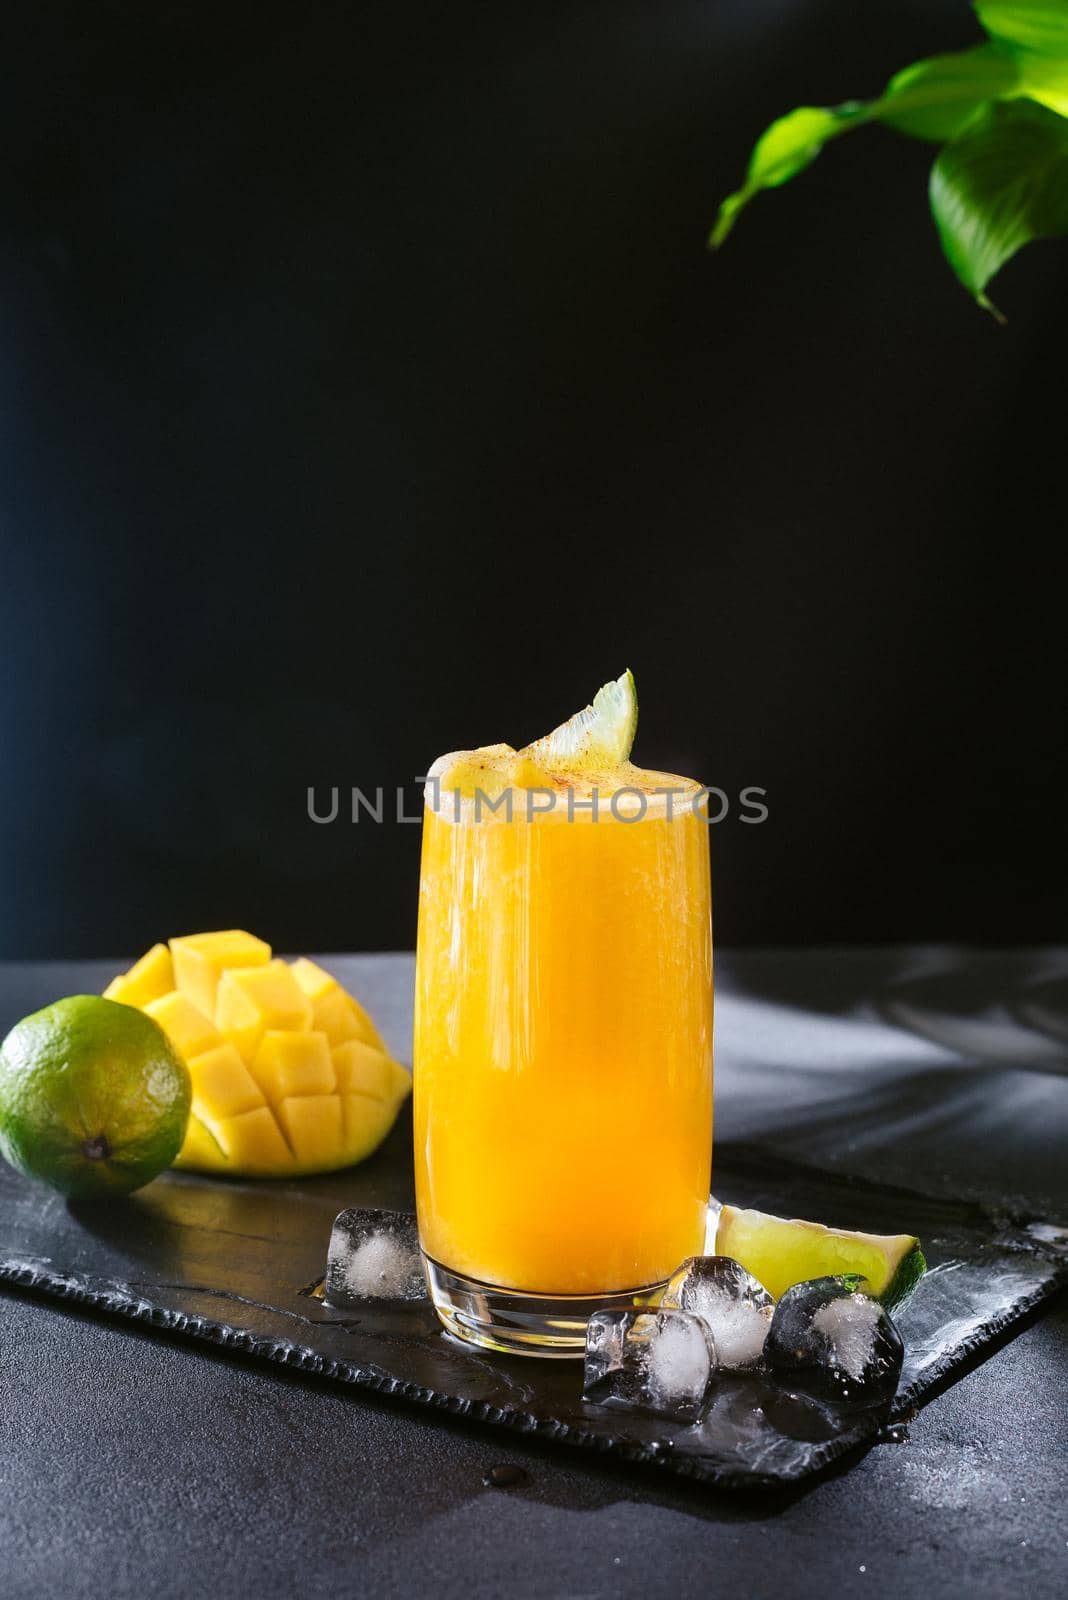 Bright yellow summer mango cocktail. Slices of mango and lime on a black background. Seasonal drink. Cocktail for vegetarians and those on a diet. Healthy Food.